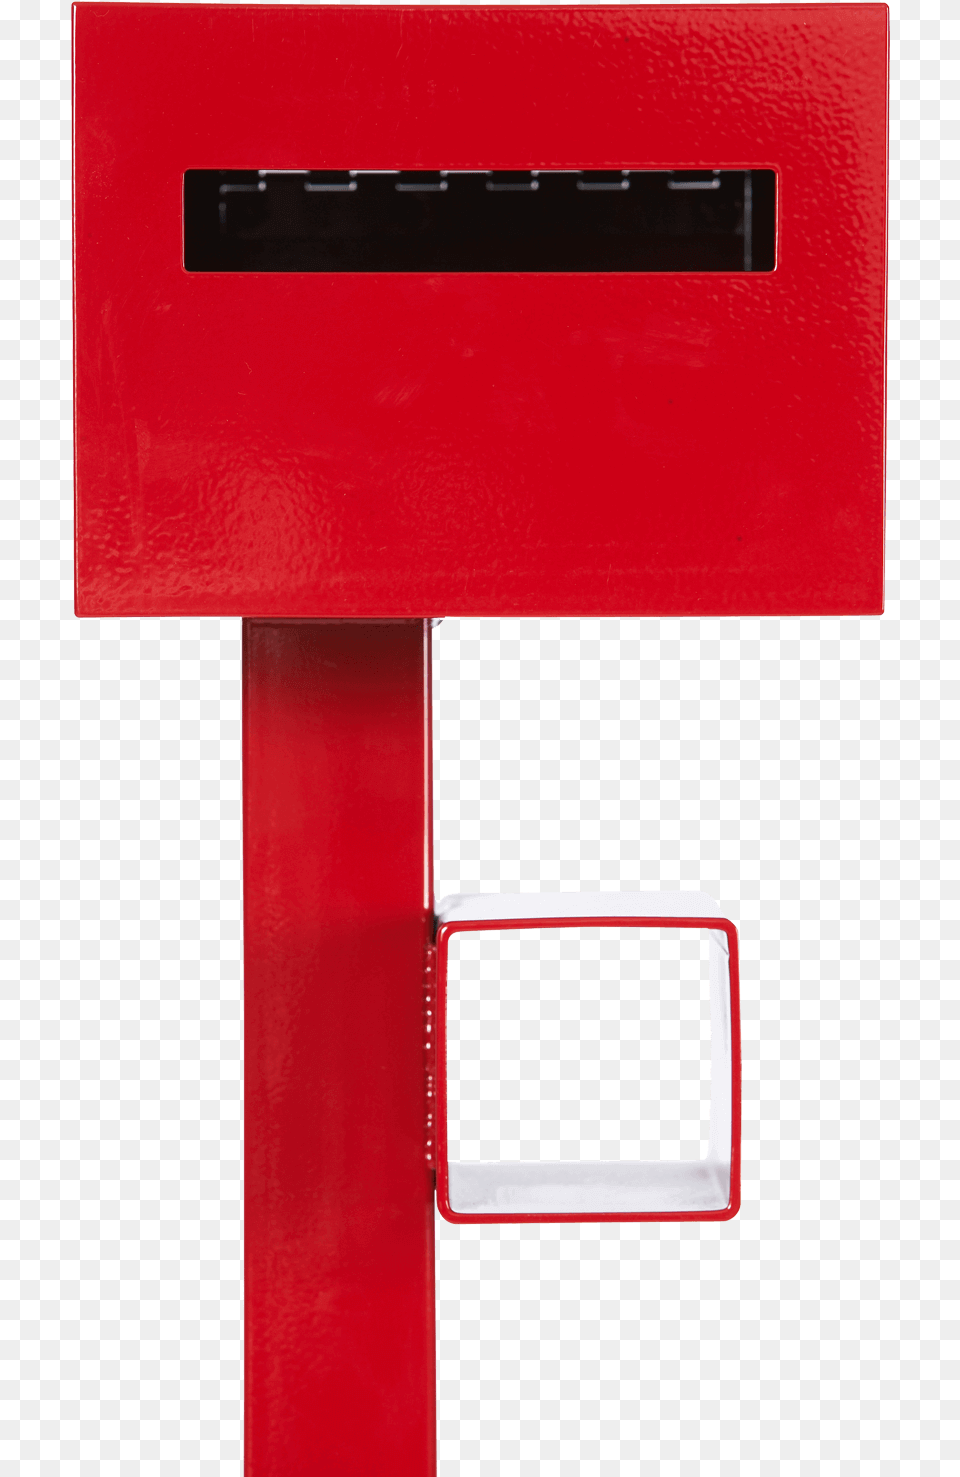 Project Letterbox Newspaper Holder Project Letterbox Newspaper Holder Robertplumb Garden, Mailbox Png Image